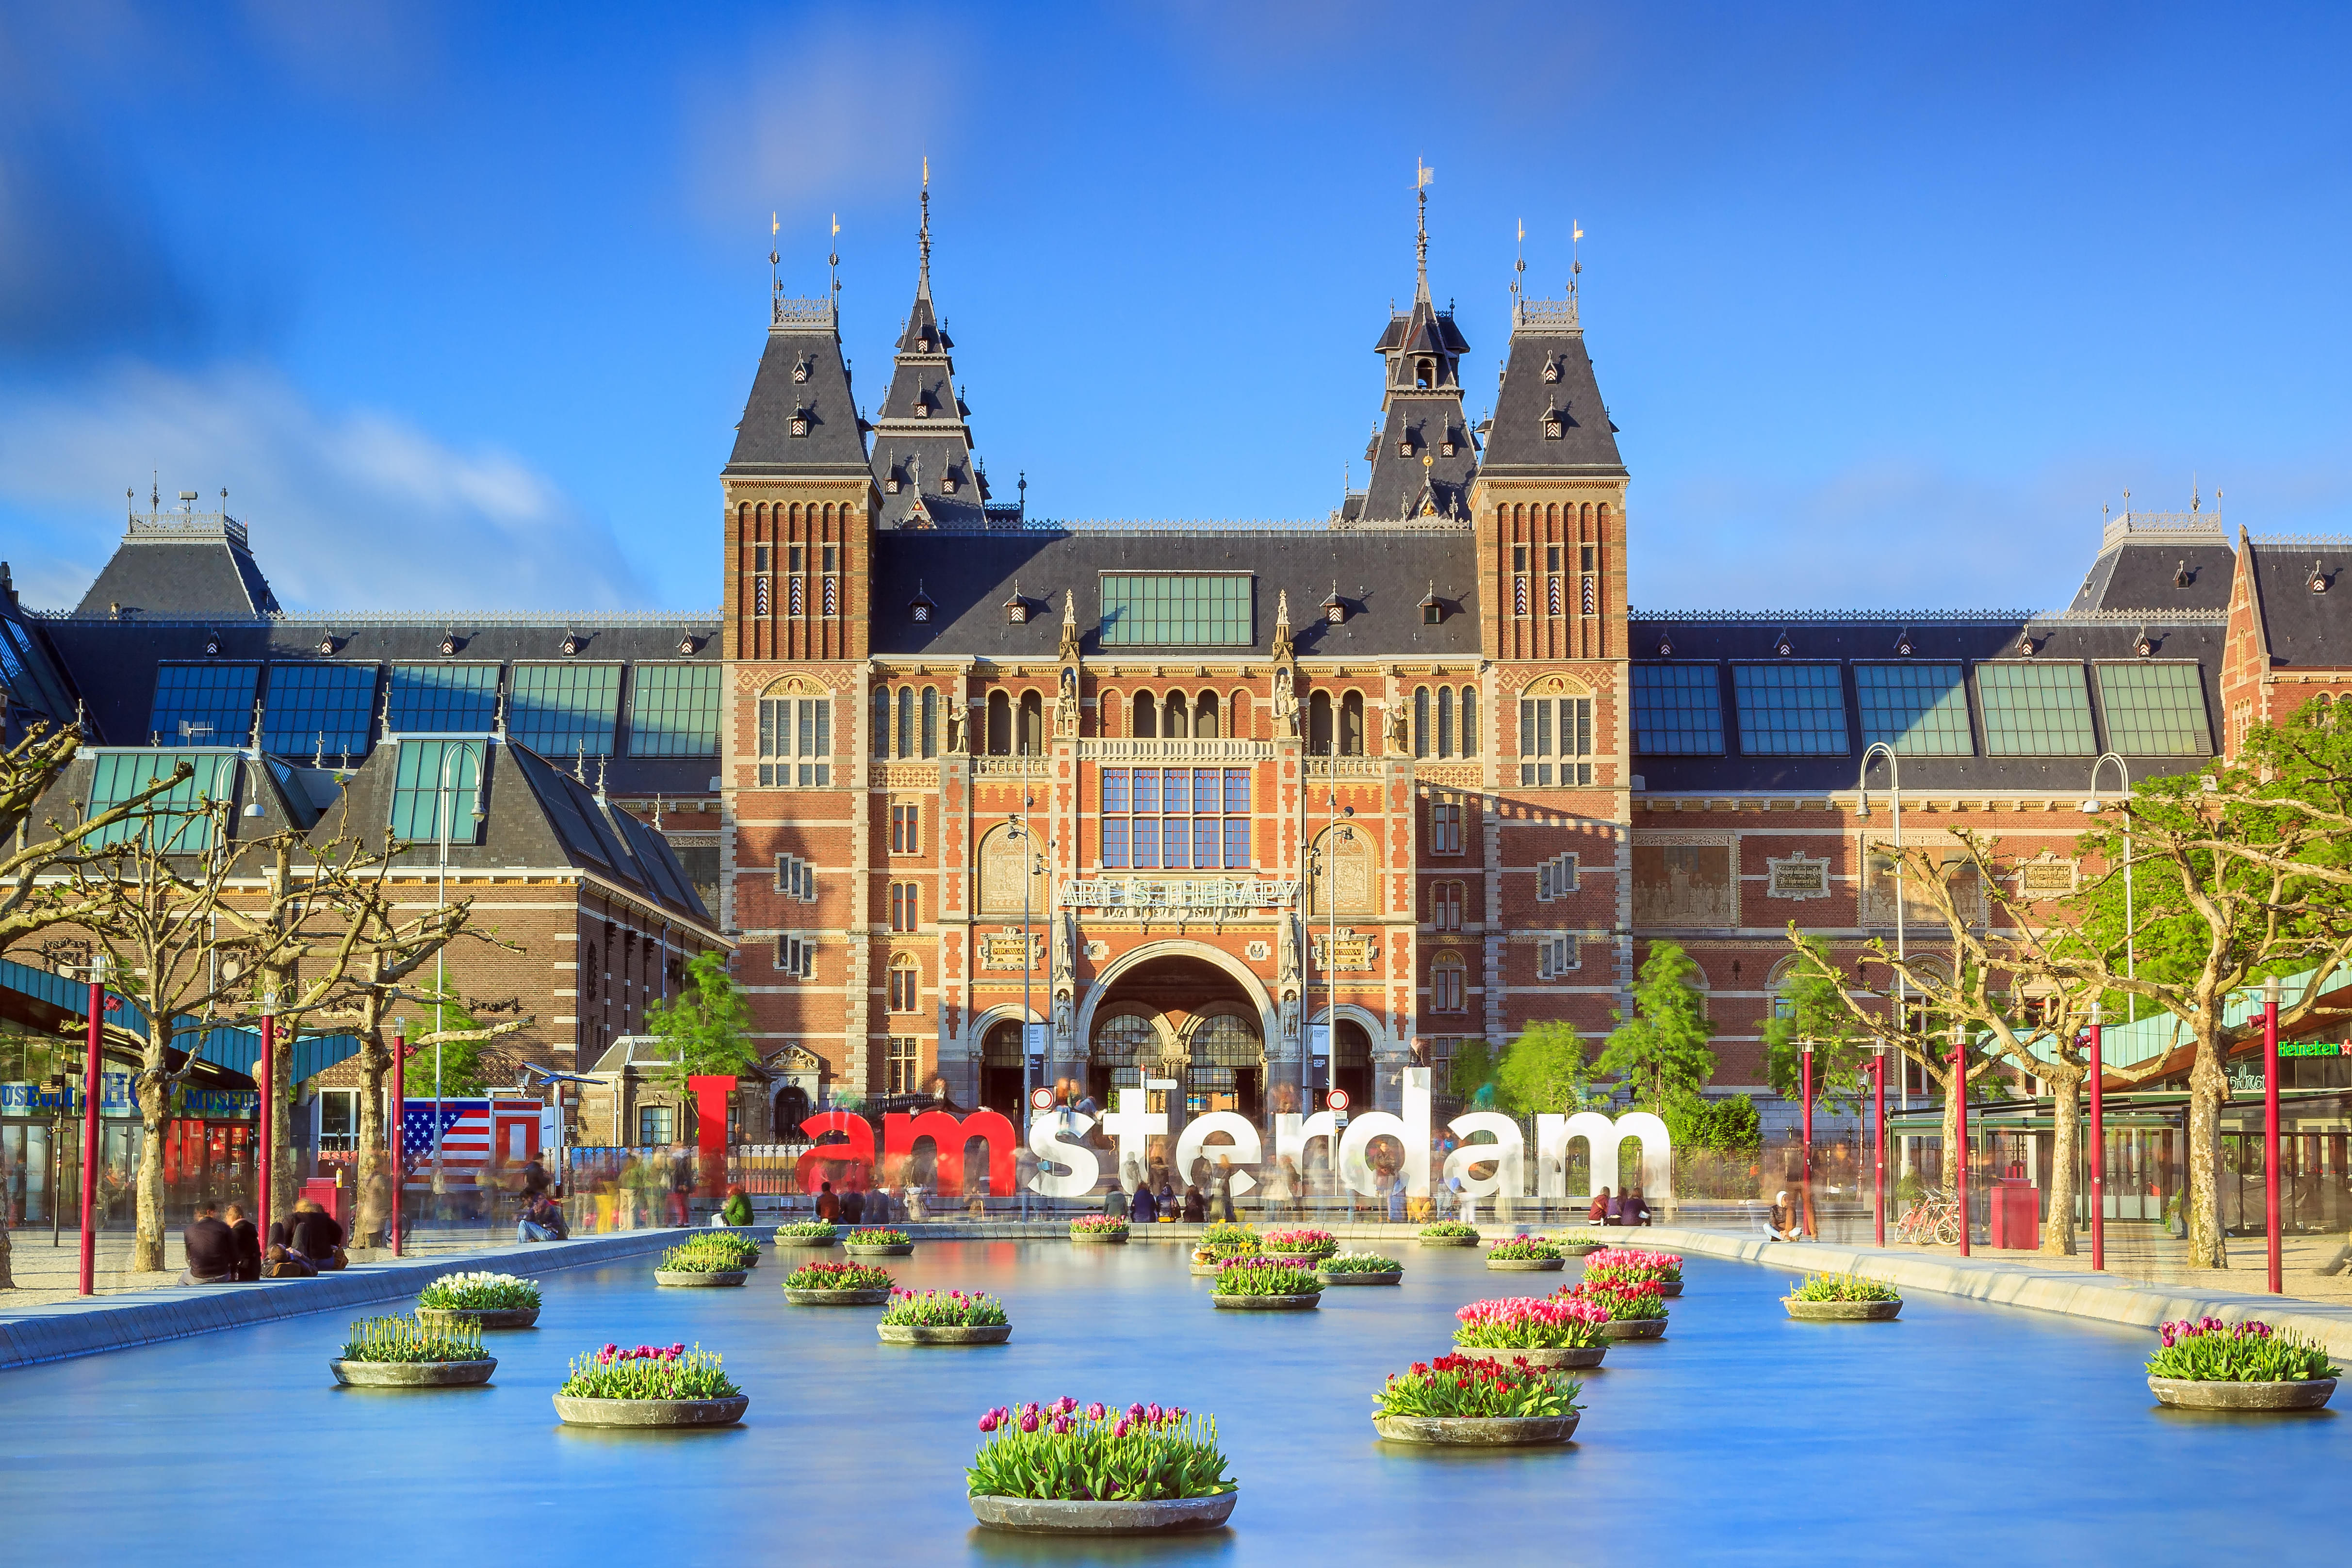 What to See at the Rijksmuseum